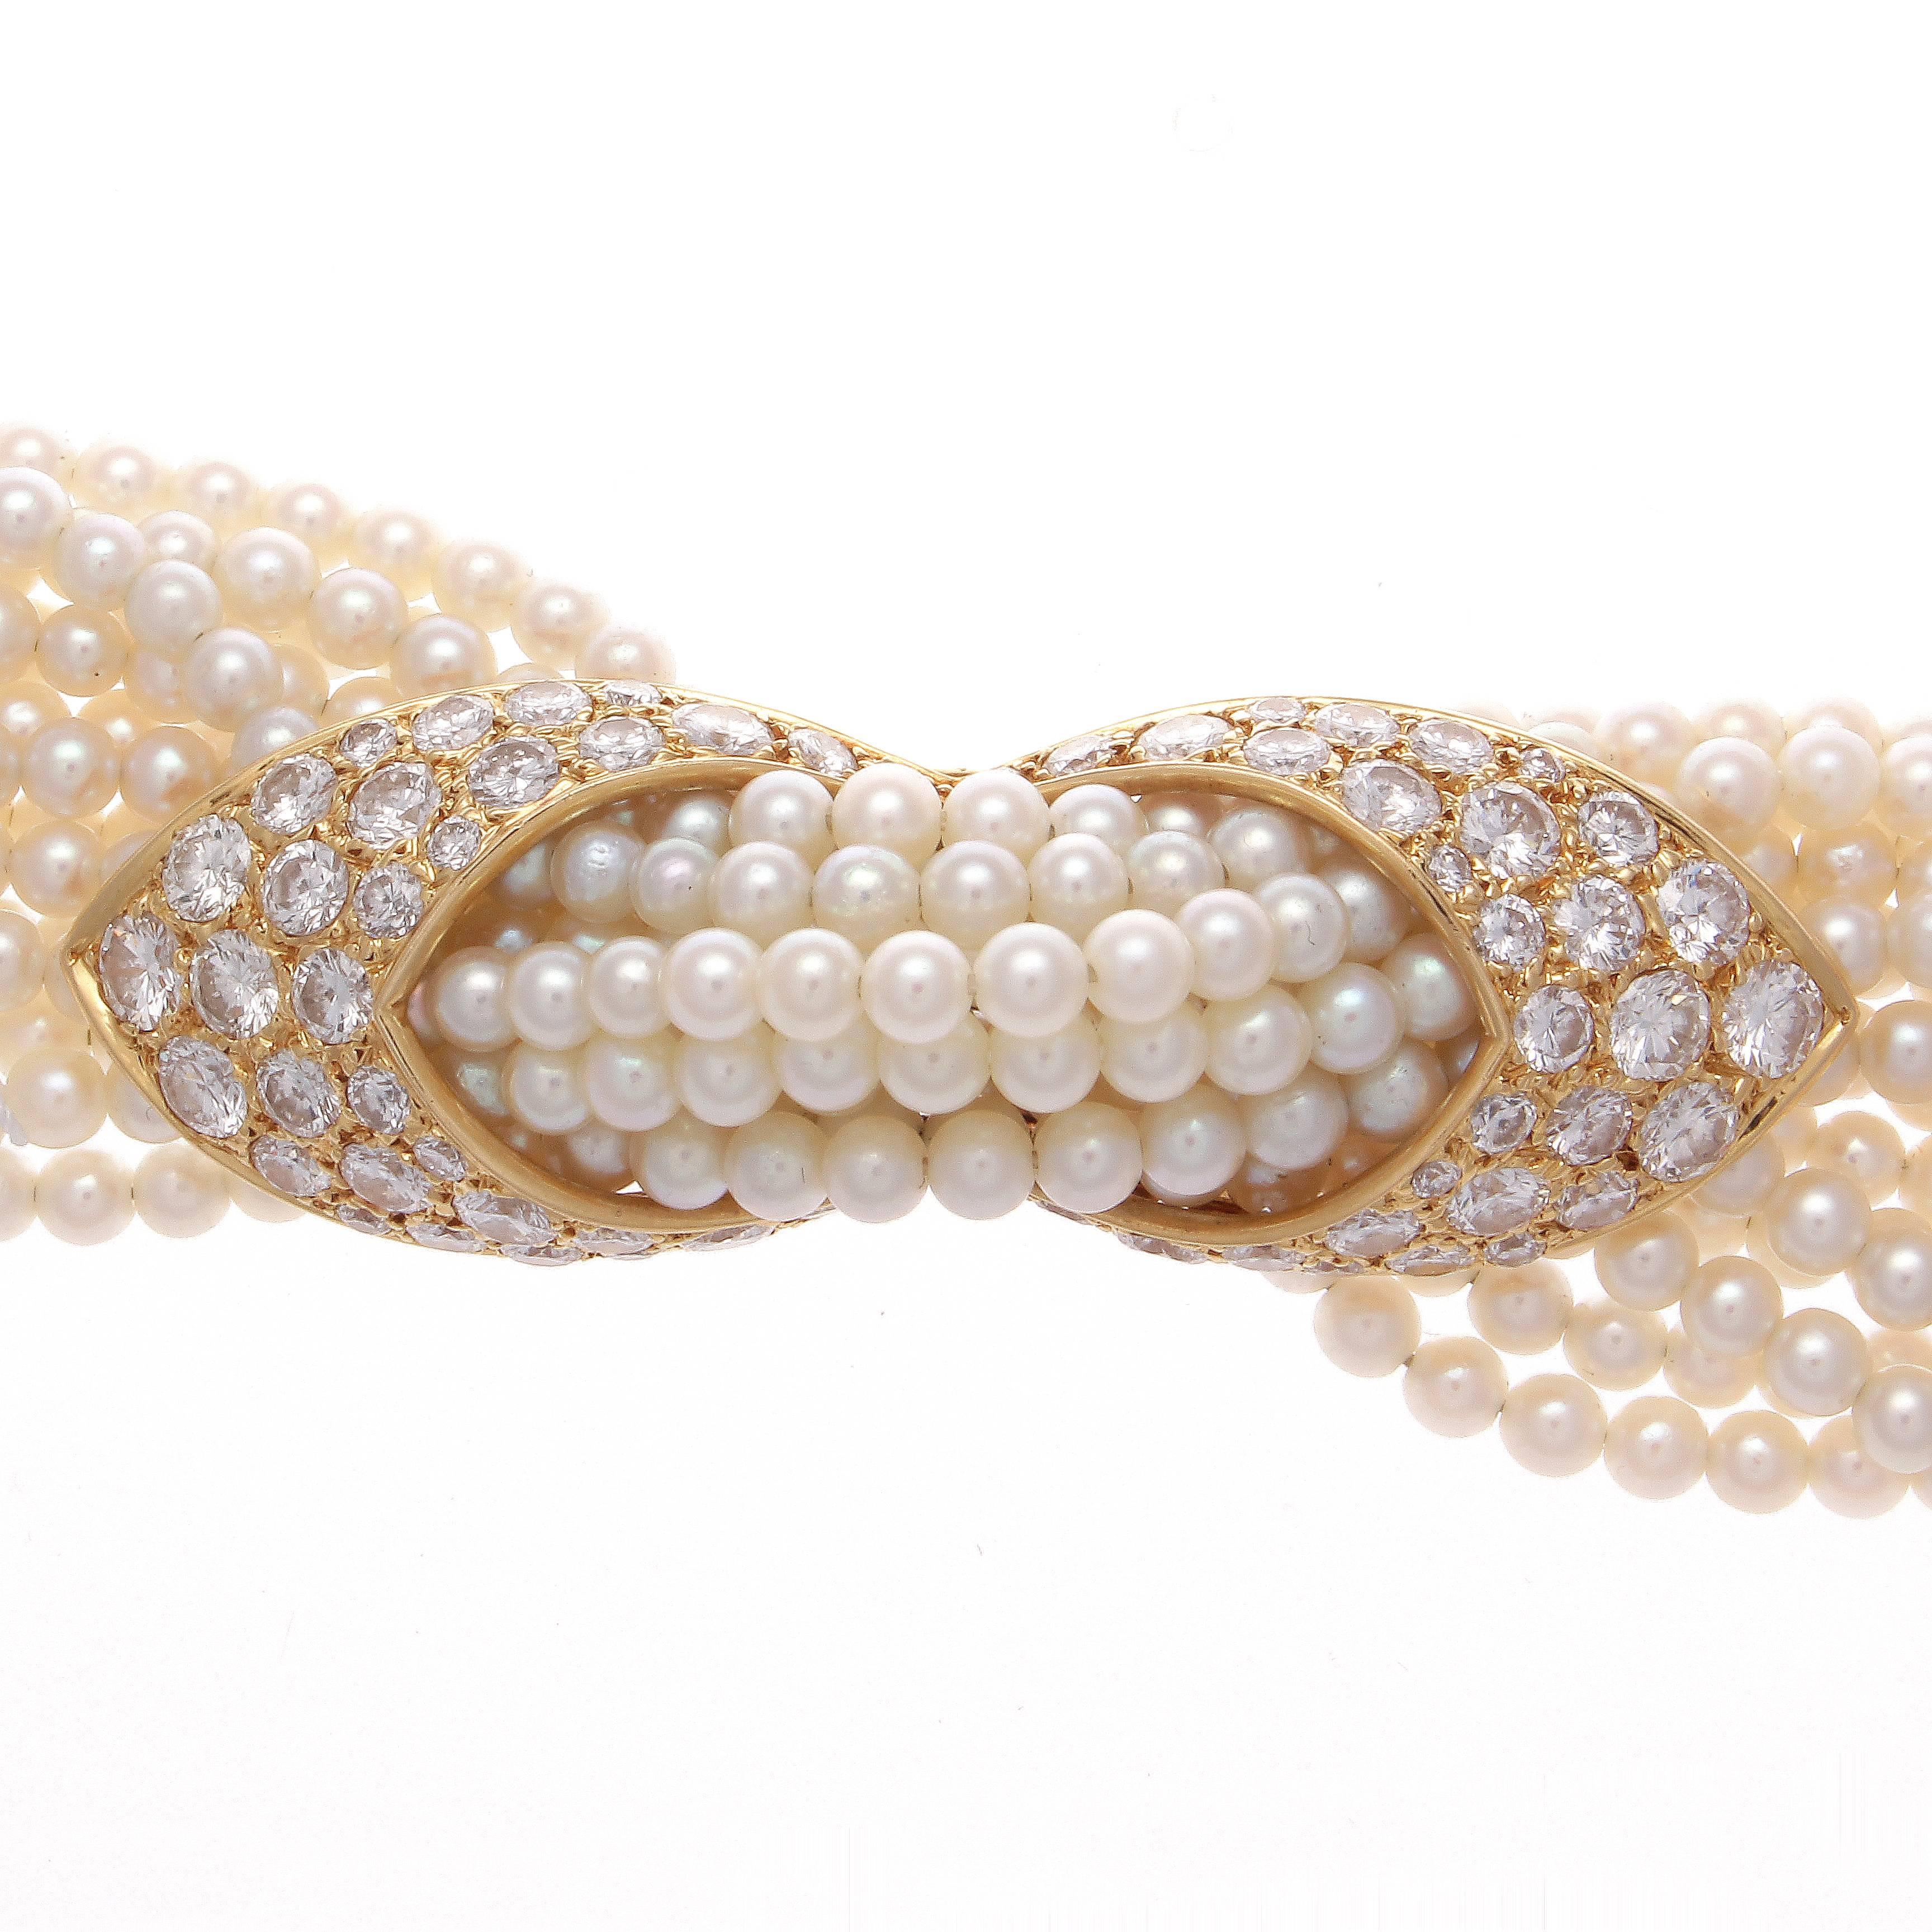 A fabric like seed pearl and diamond bracelet that is comfortable to wear from Cartier. Designed with sinuous strands of silky seed pearls that gracefully glide through the free moving center piece made of diamonds and gold. Perfectly finished with